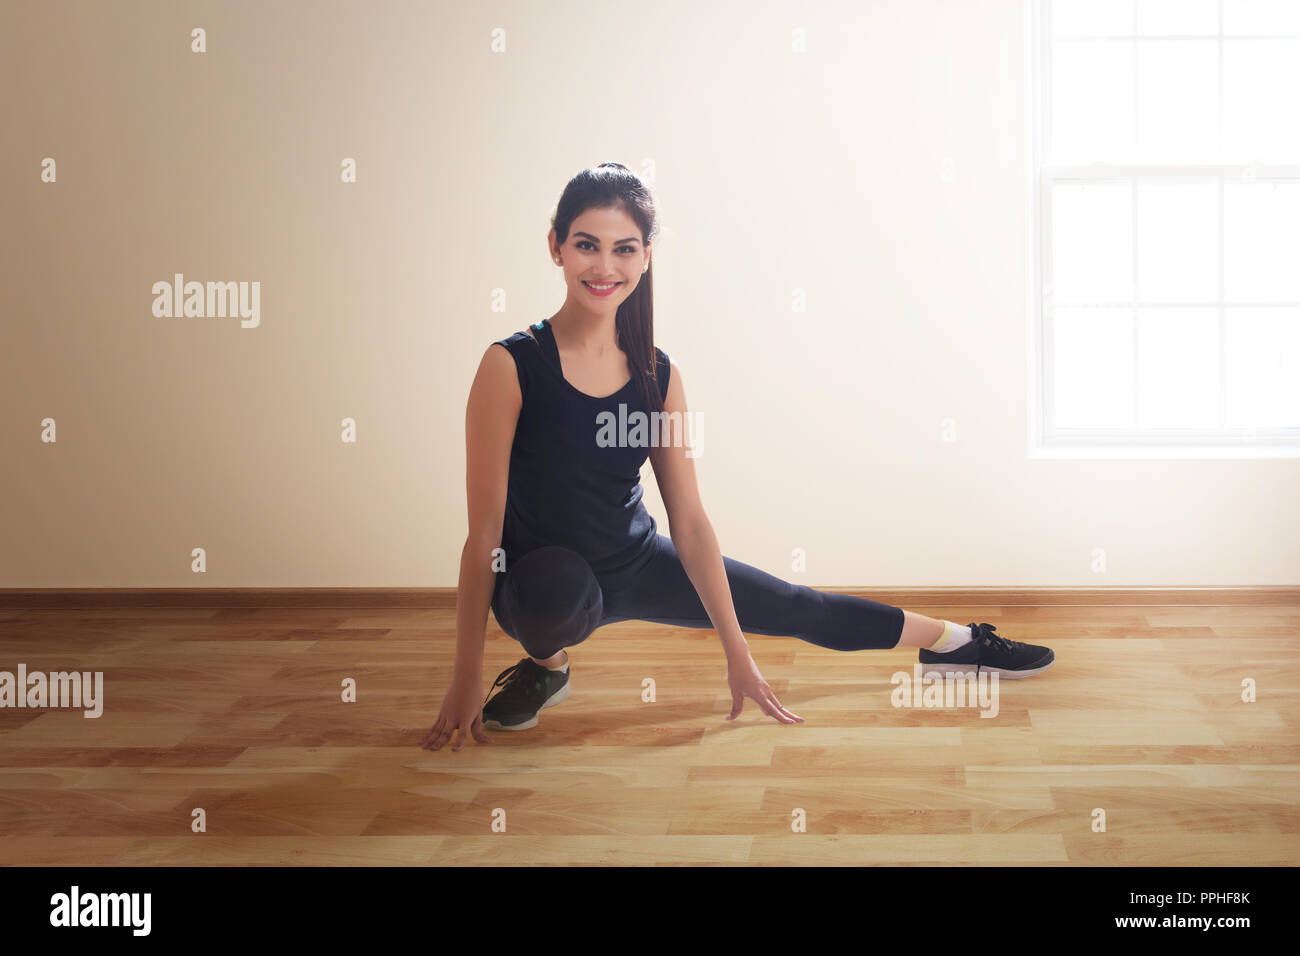 Young woman in workout clothes doing leg stretching exercises on the floor. Stock Photo